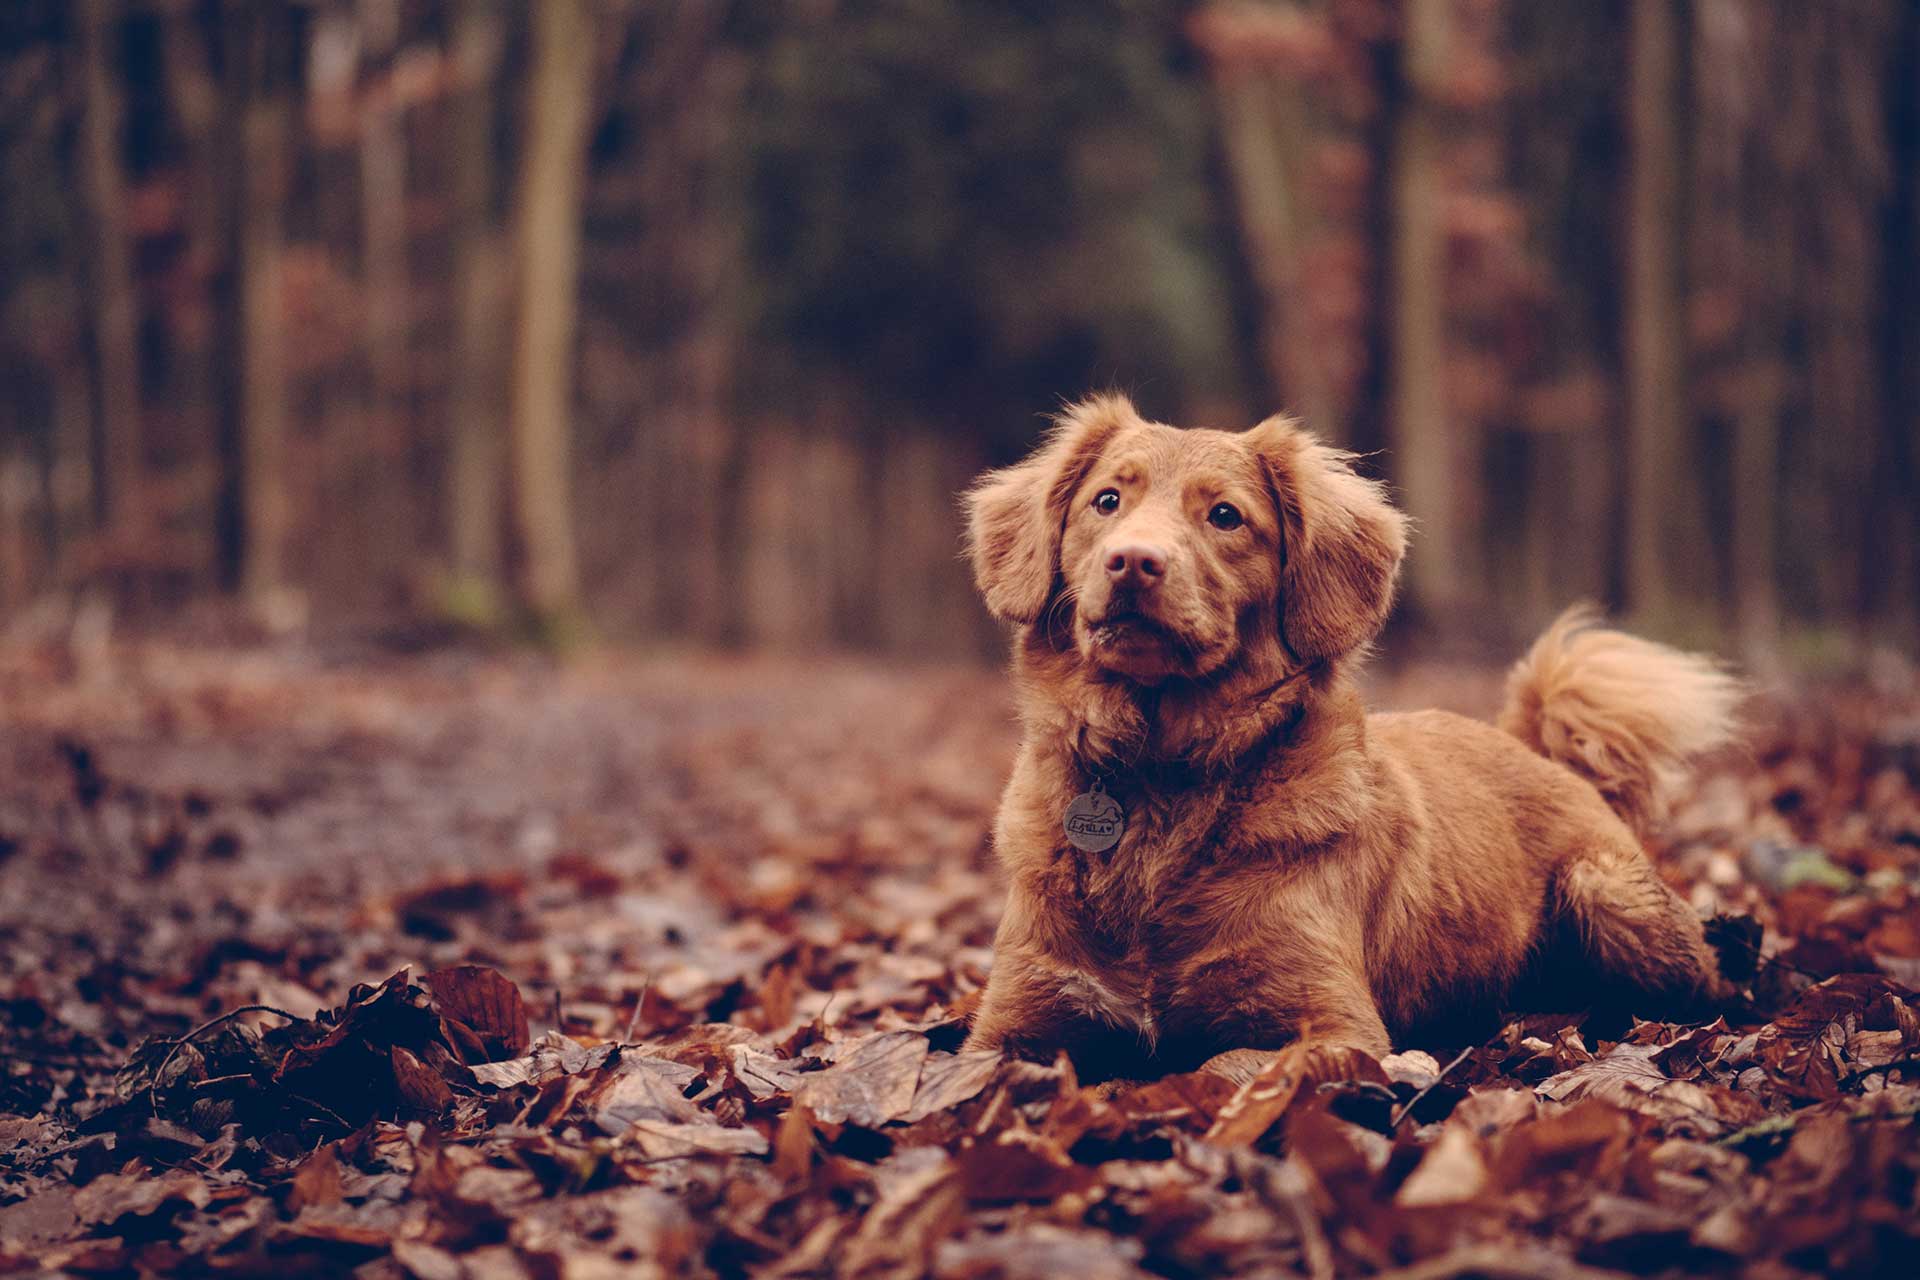 Dogs are welcome too when you come for a cosy Autumn self-catering break in Scotland, at Melfort Village